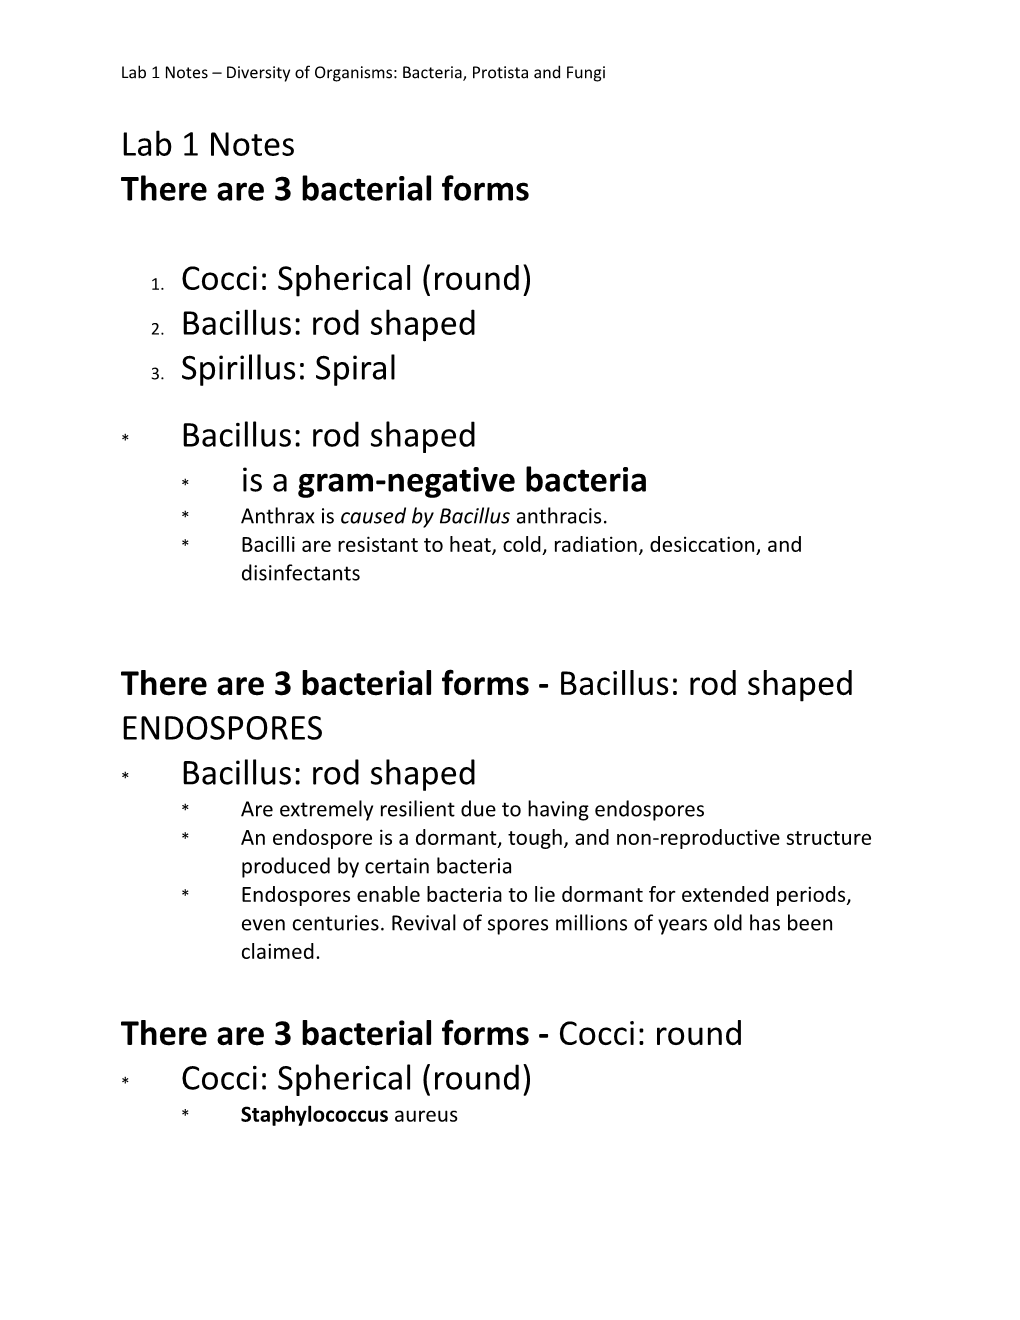 Lab 1 Notes Diversity of Organisms: Bacteria, Protista and Fungi